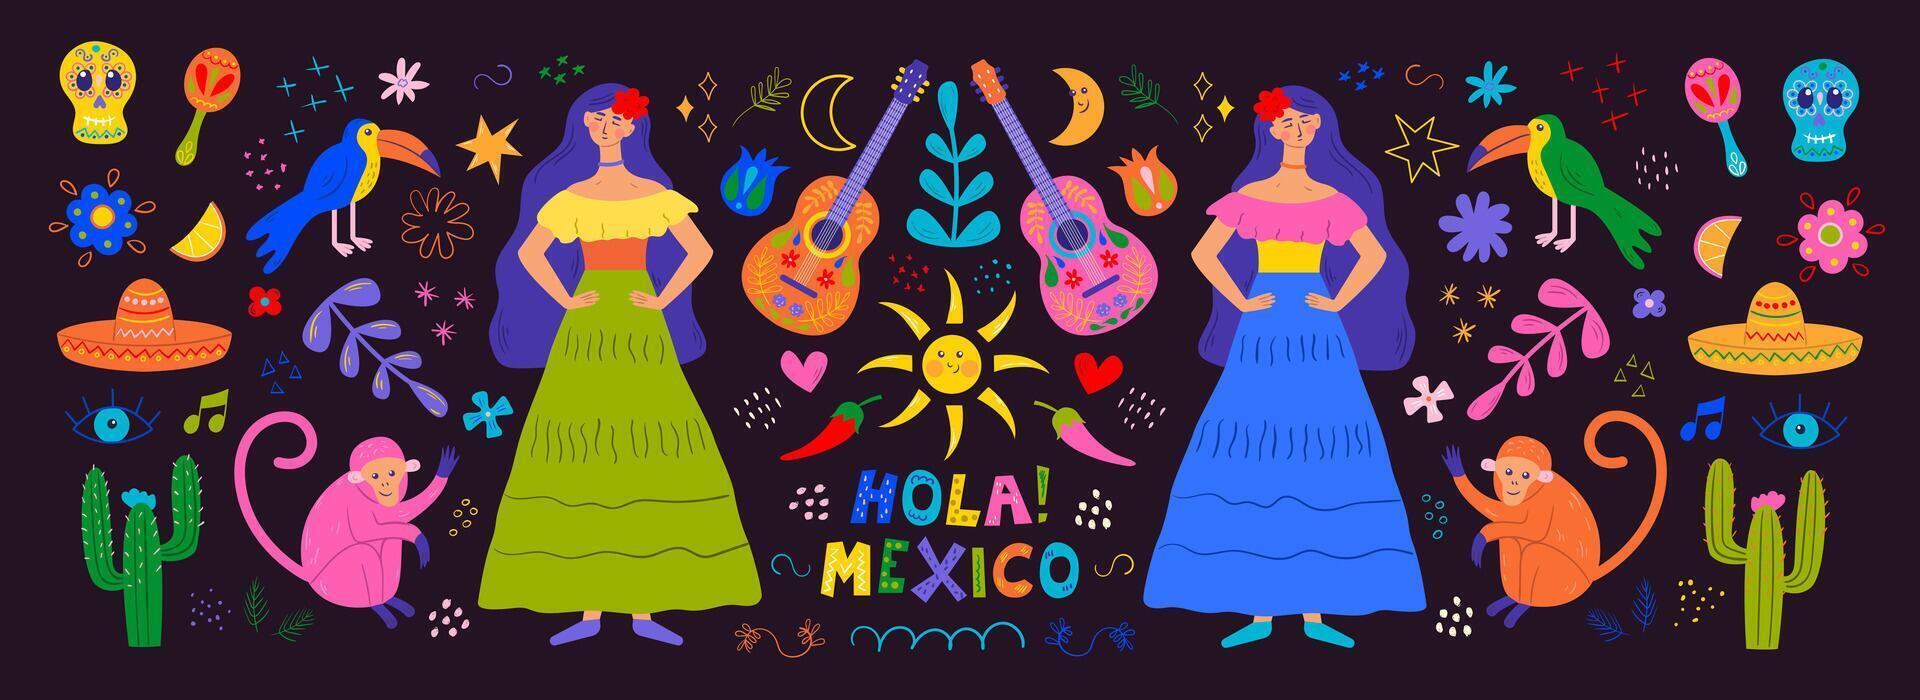 Mexican holiday, party. Cinco De Mayo. Vector illustration set with traditional symbols of cactus, skull, guitar, flowers and animals